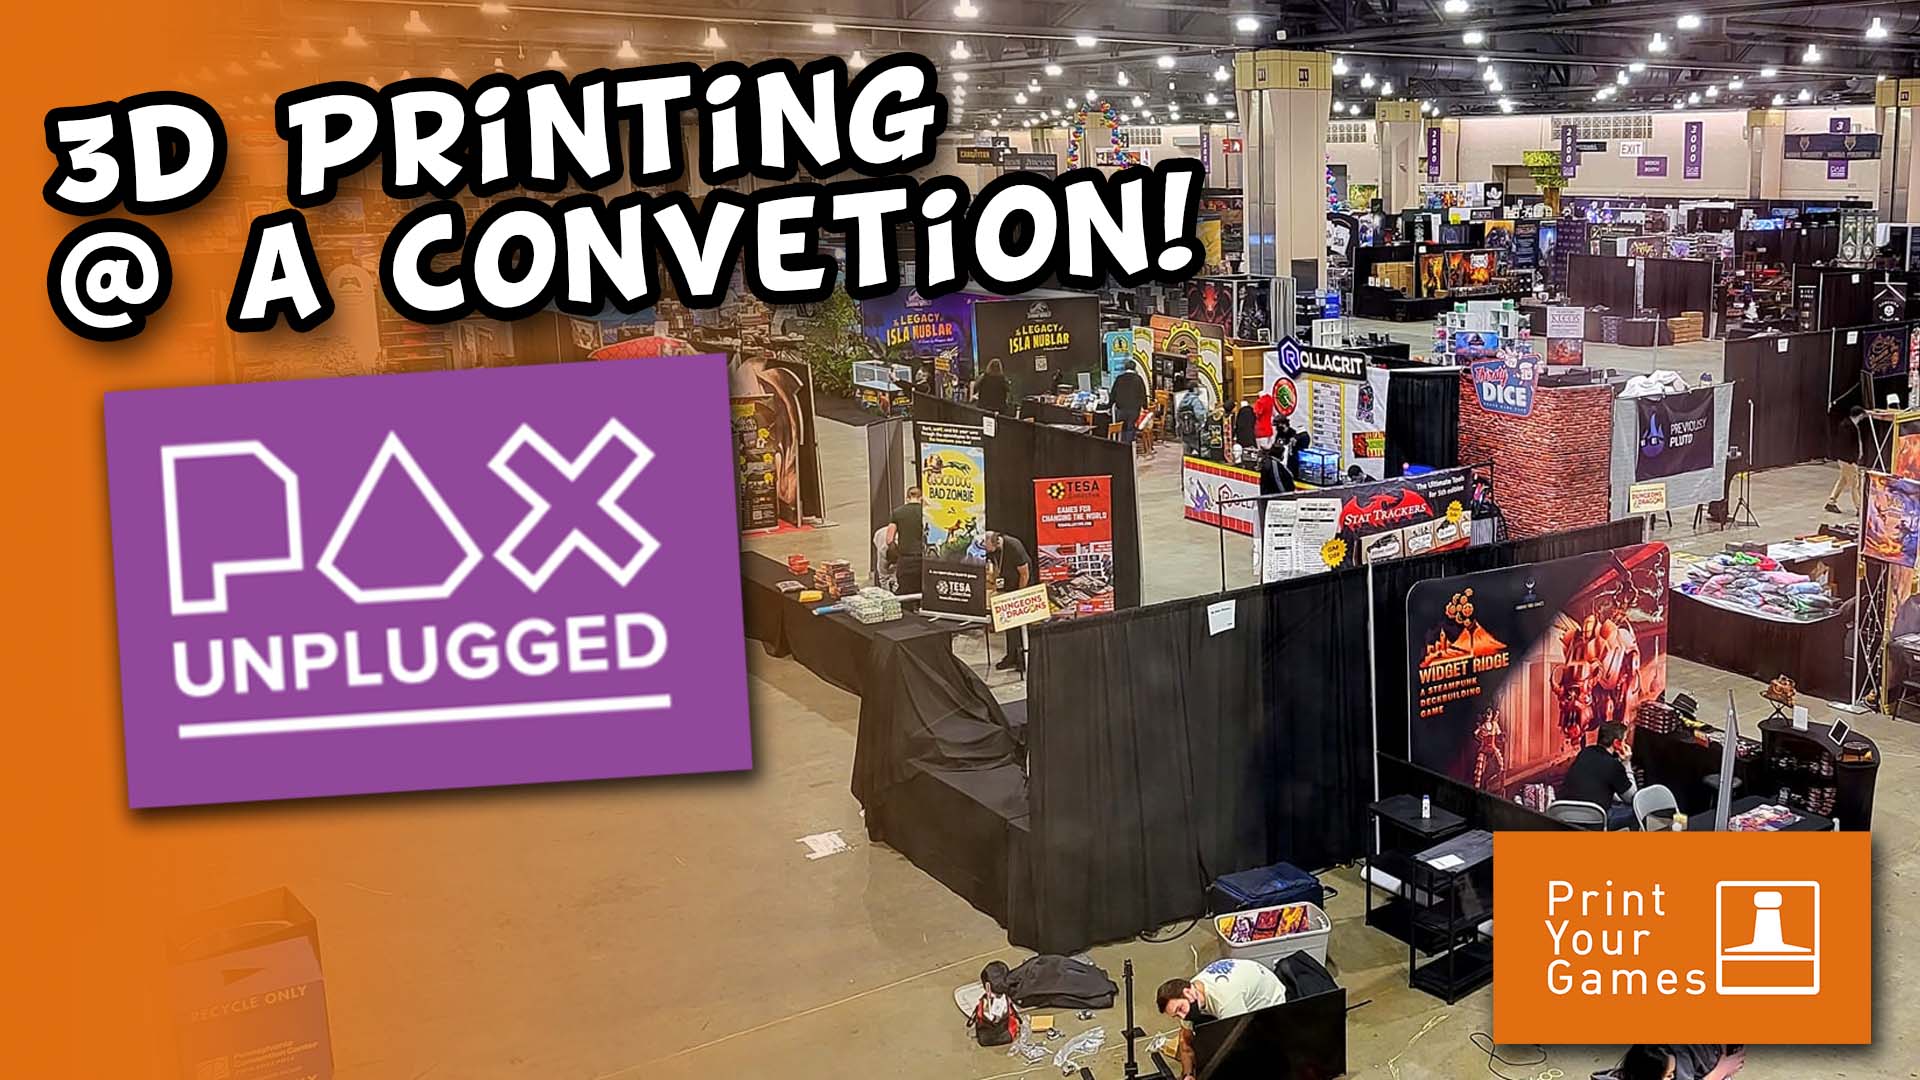 3d Printing at a Convention - Pax Unplugged - Print Your Games Podcast Episode 6